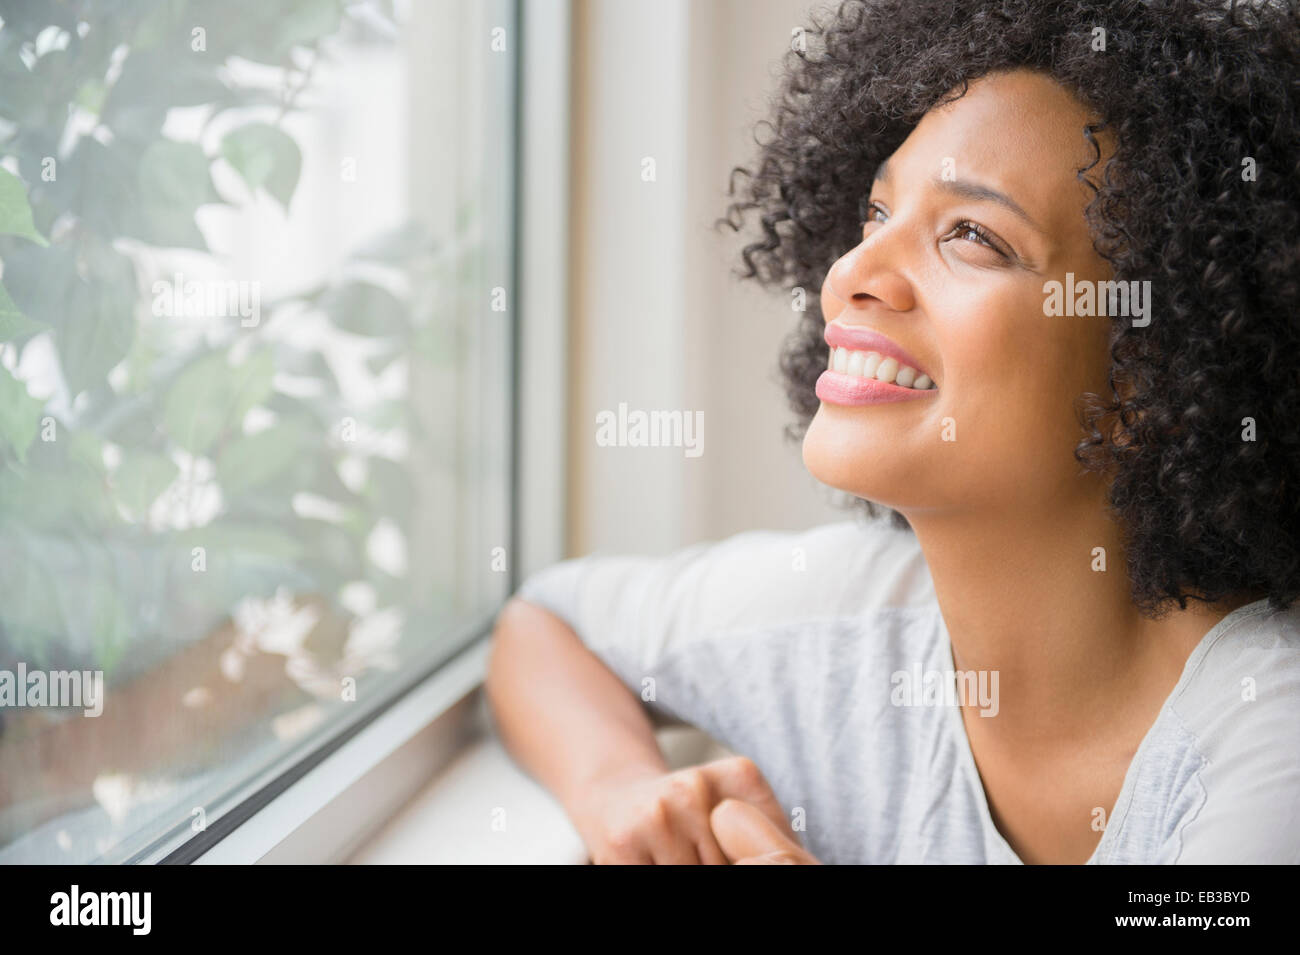 Smiling woman looking out window Banque D'Images